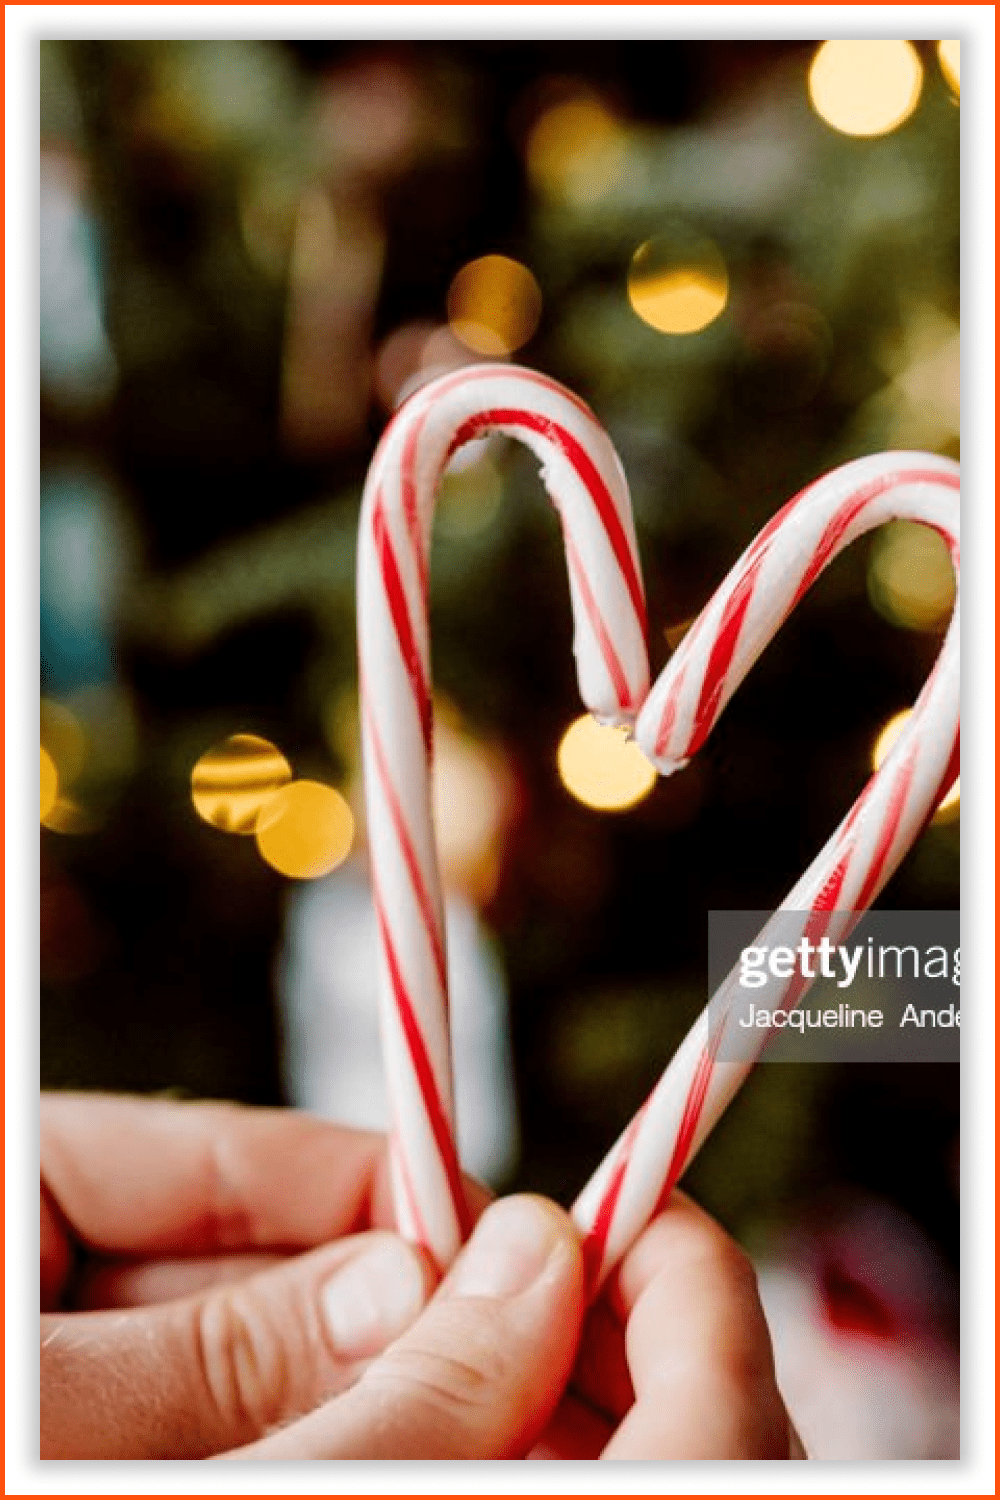 Two candies in heart-shaped form and a tree with lights in the background.